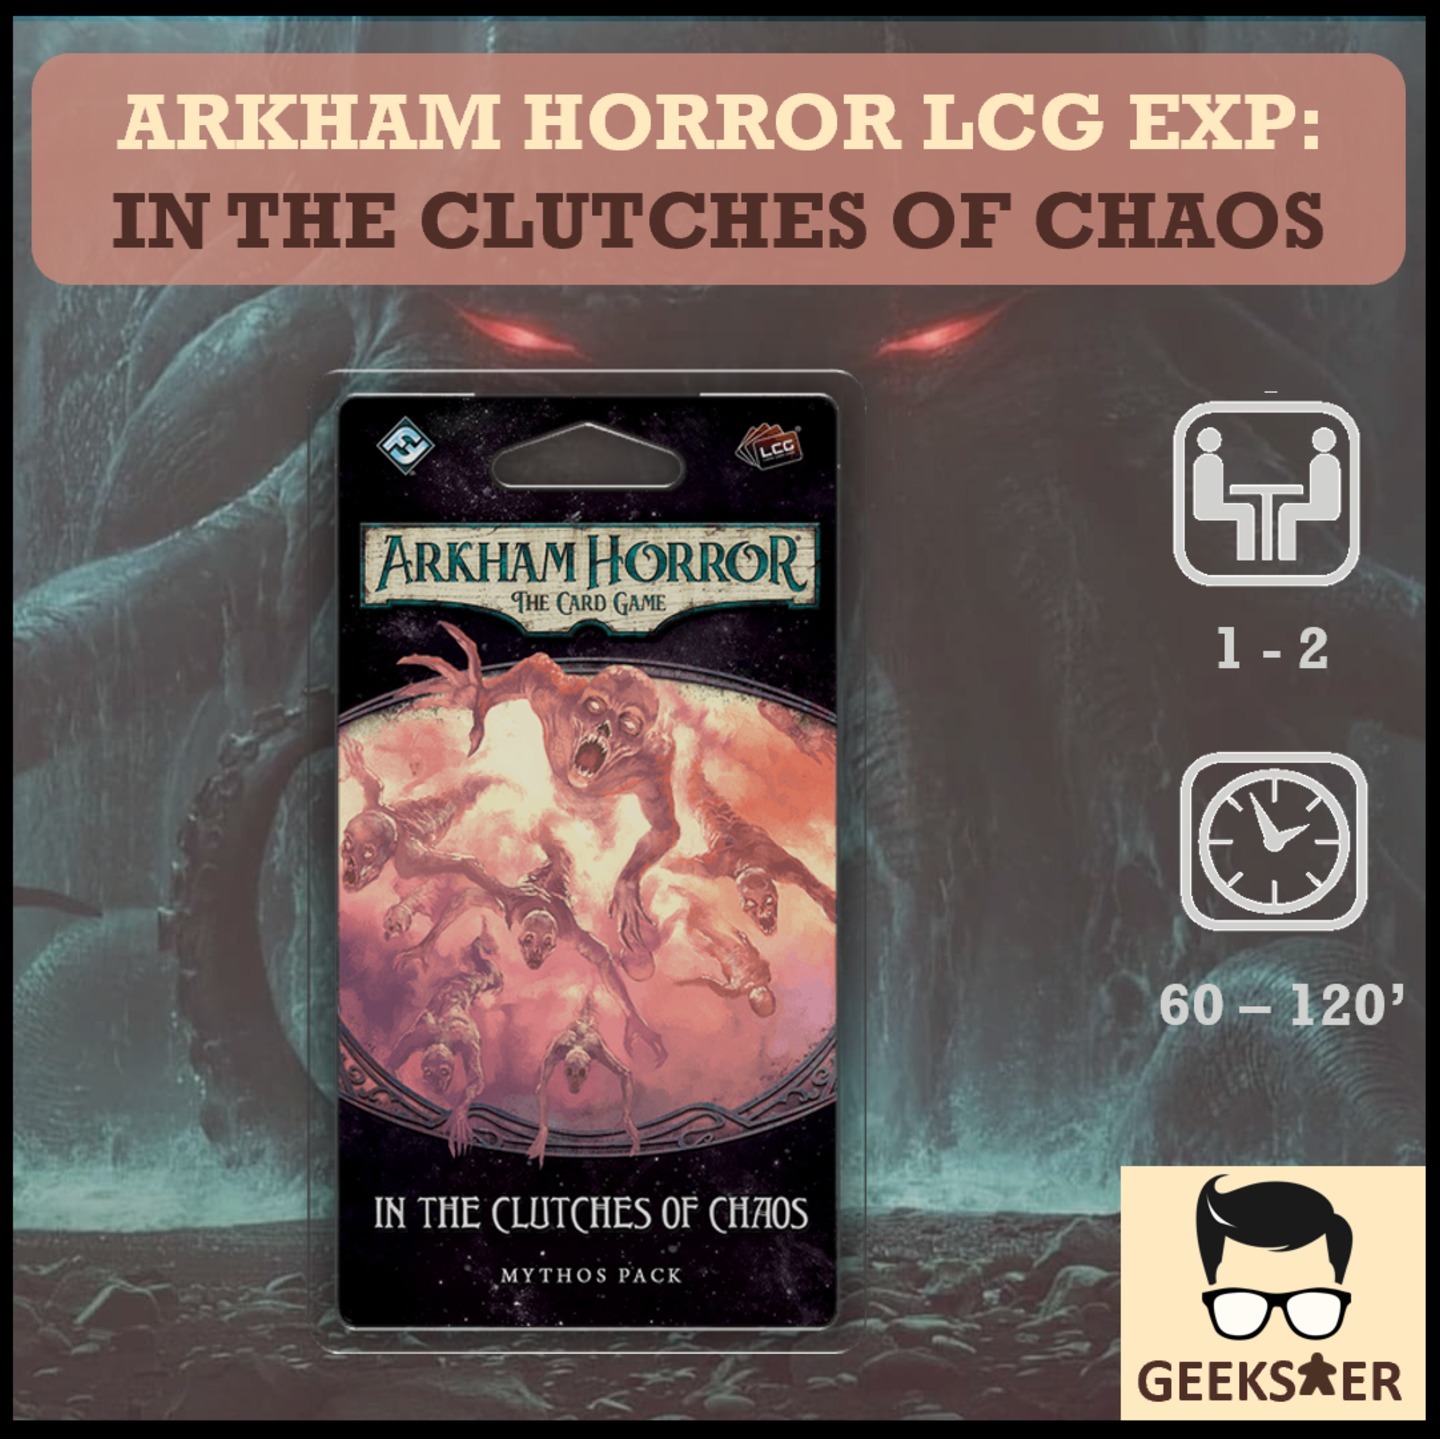 Arkham Horror LCG Exp - In the Clutches of Chaos